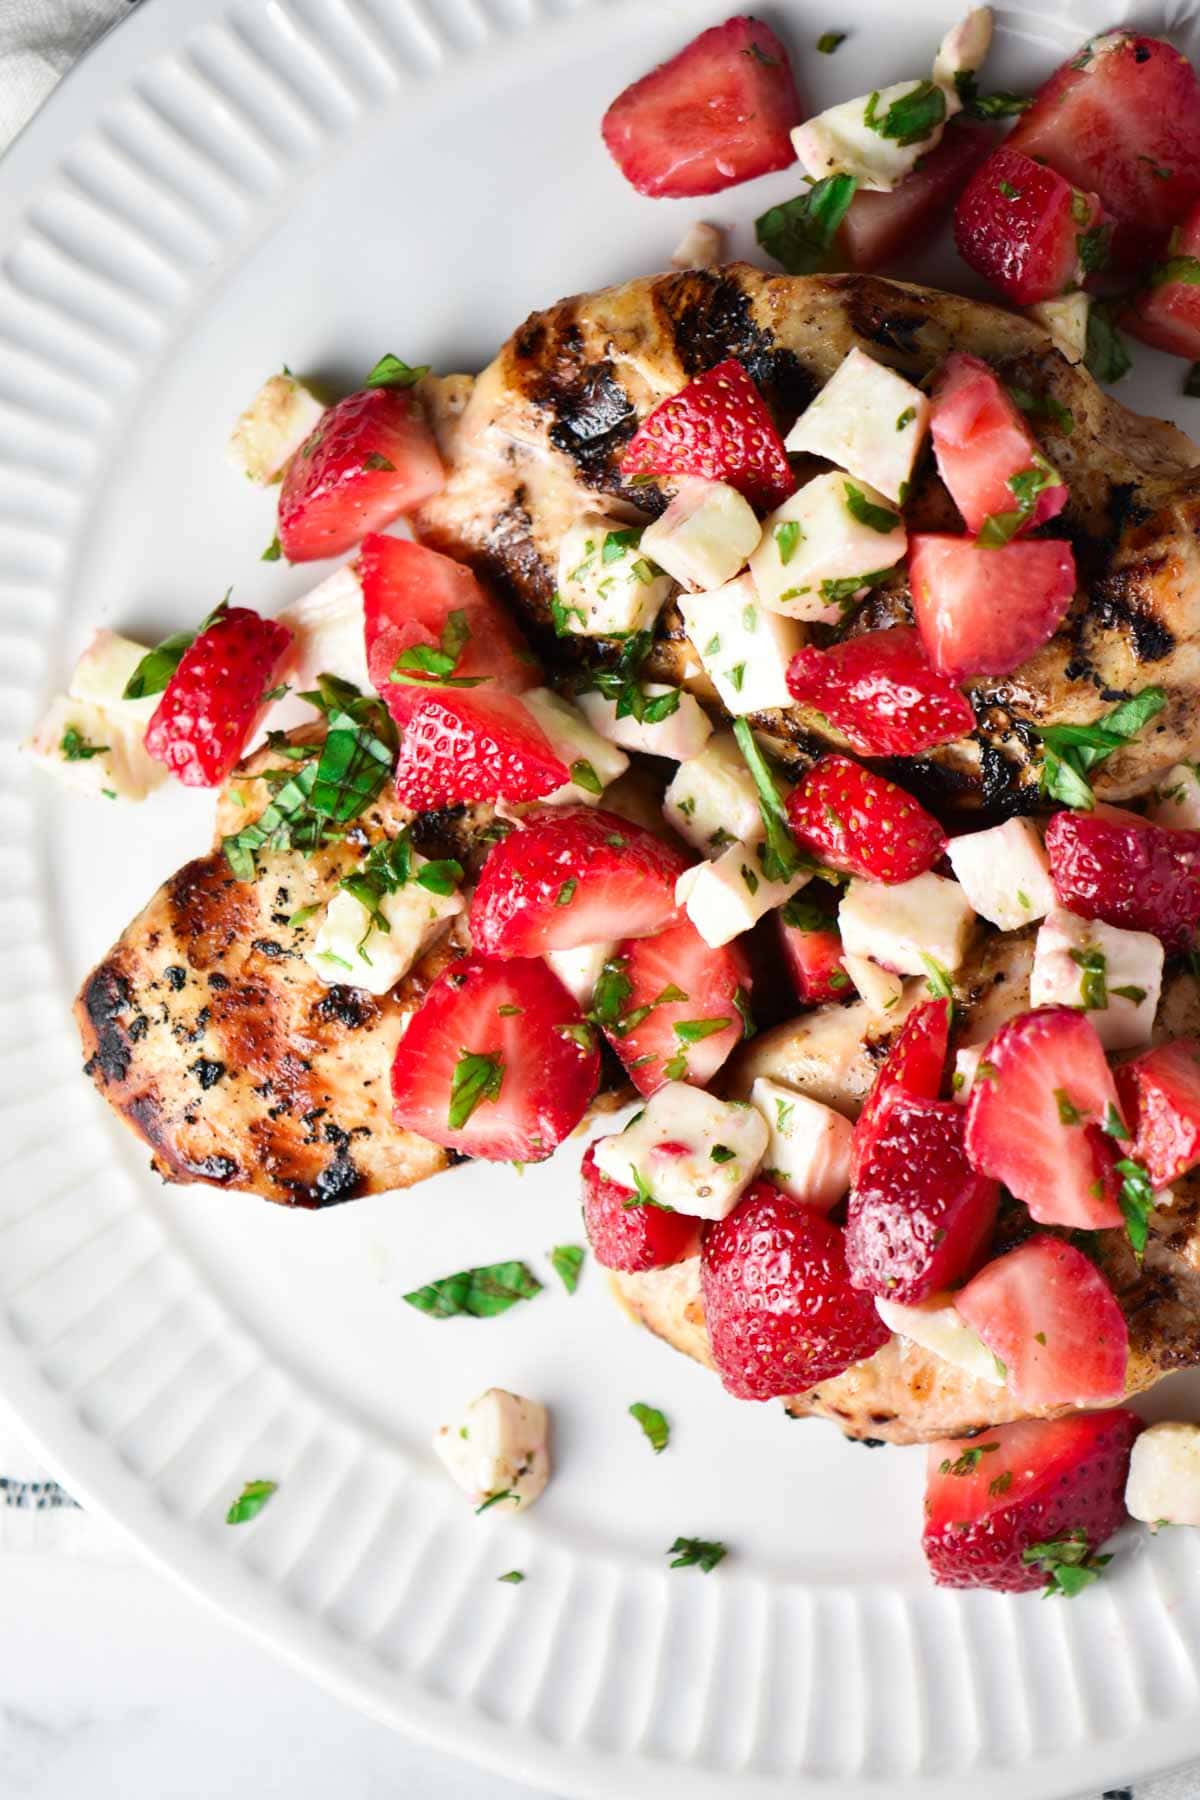 Grilled chicken topped with a strawberry mozzarella relish